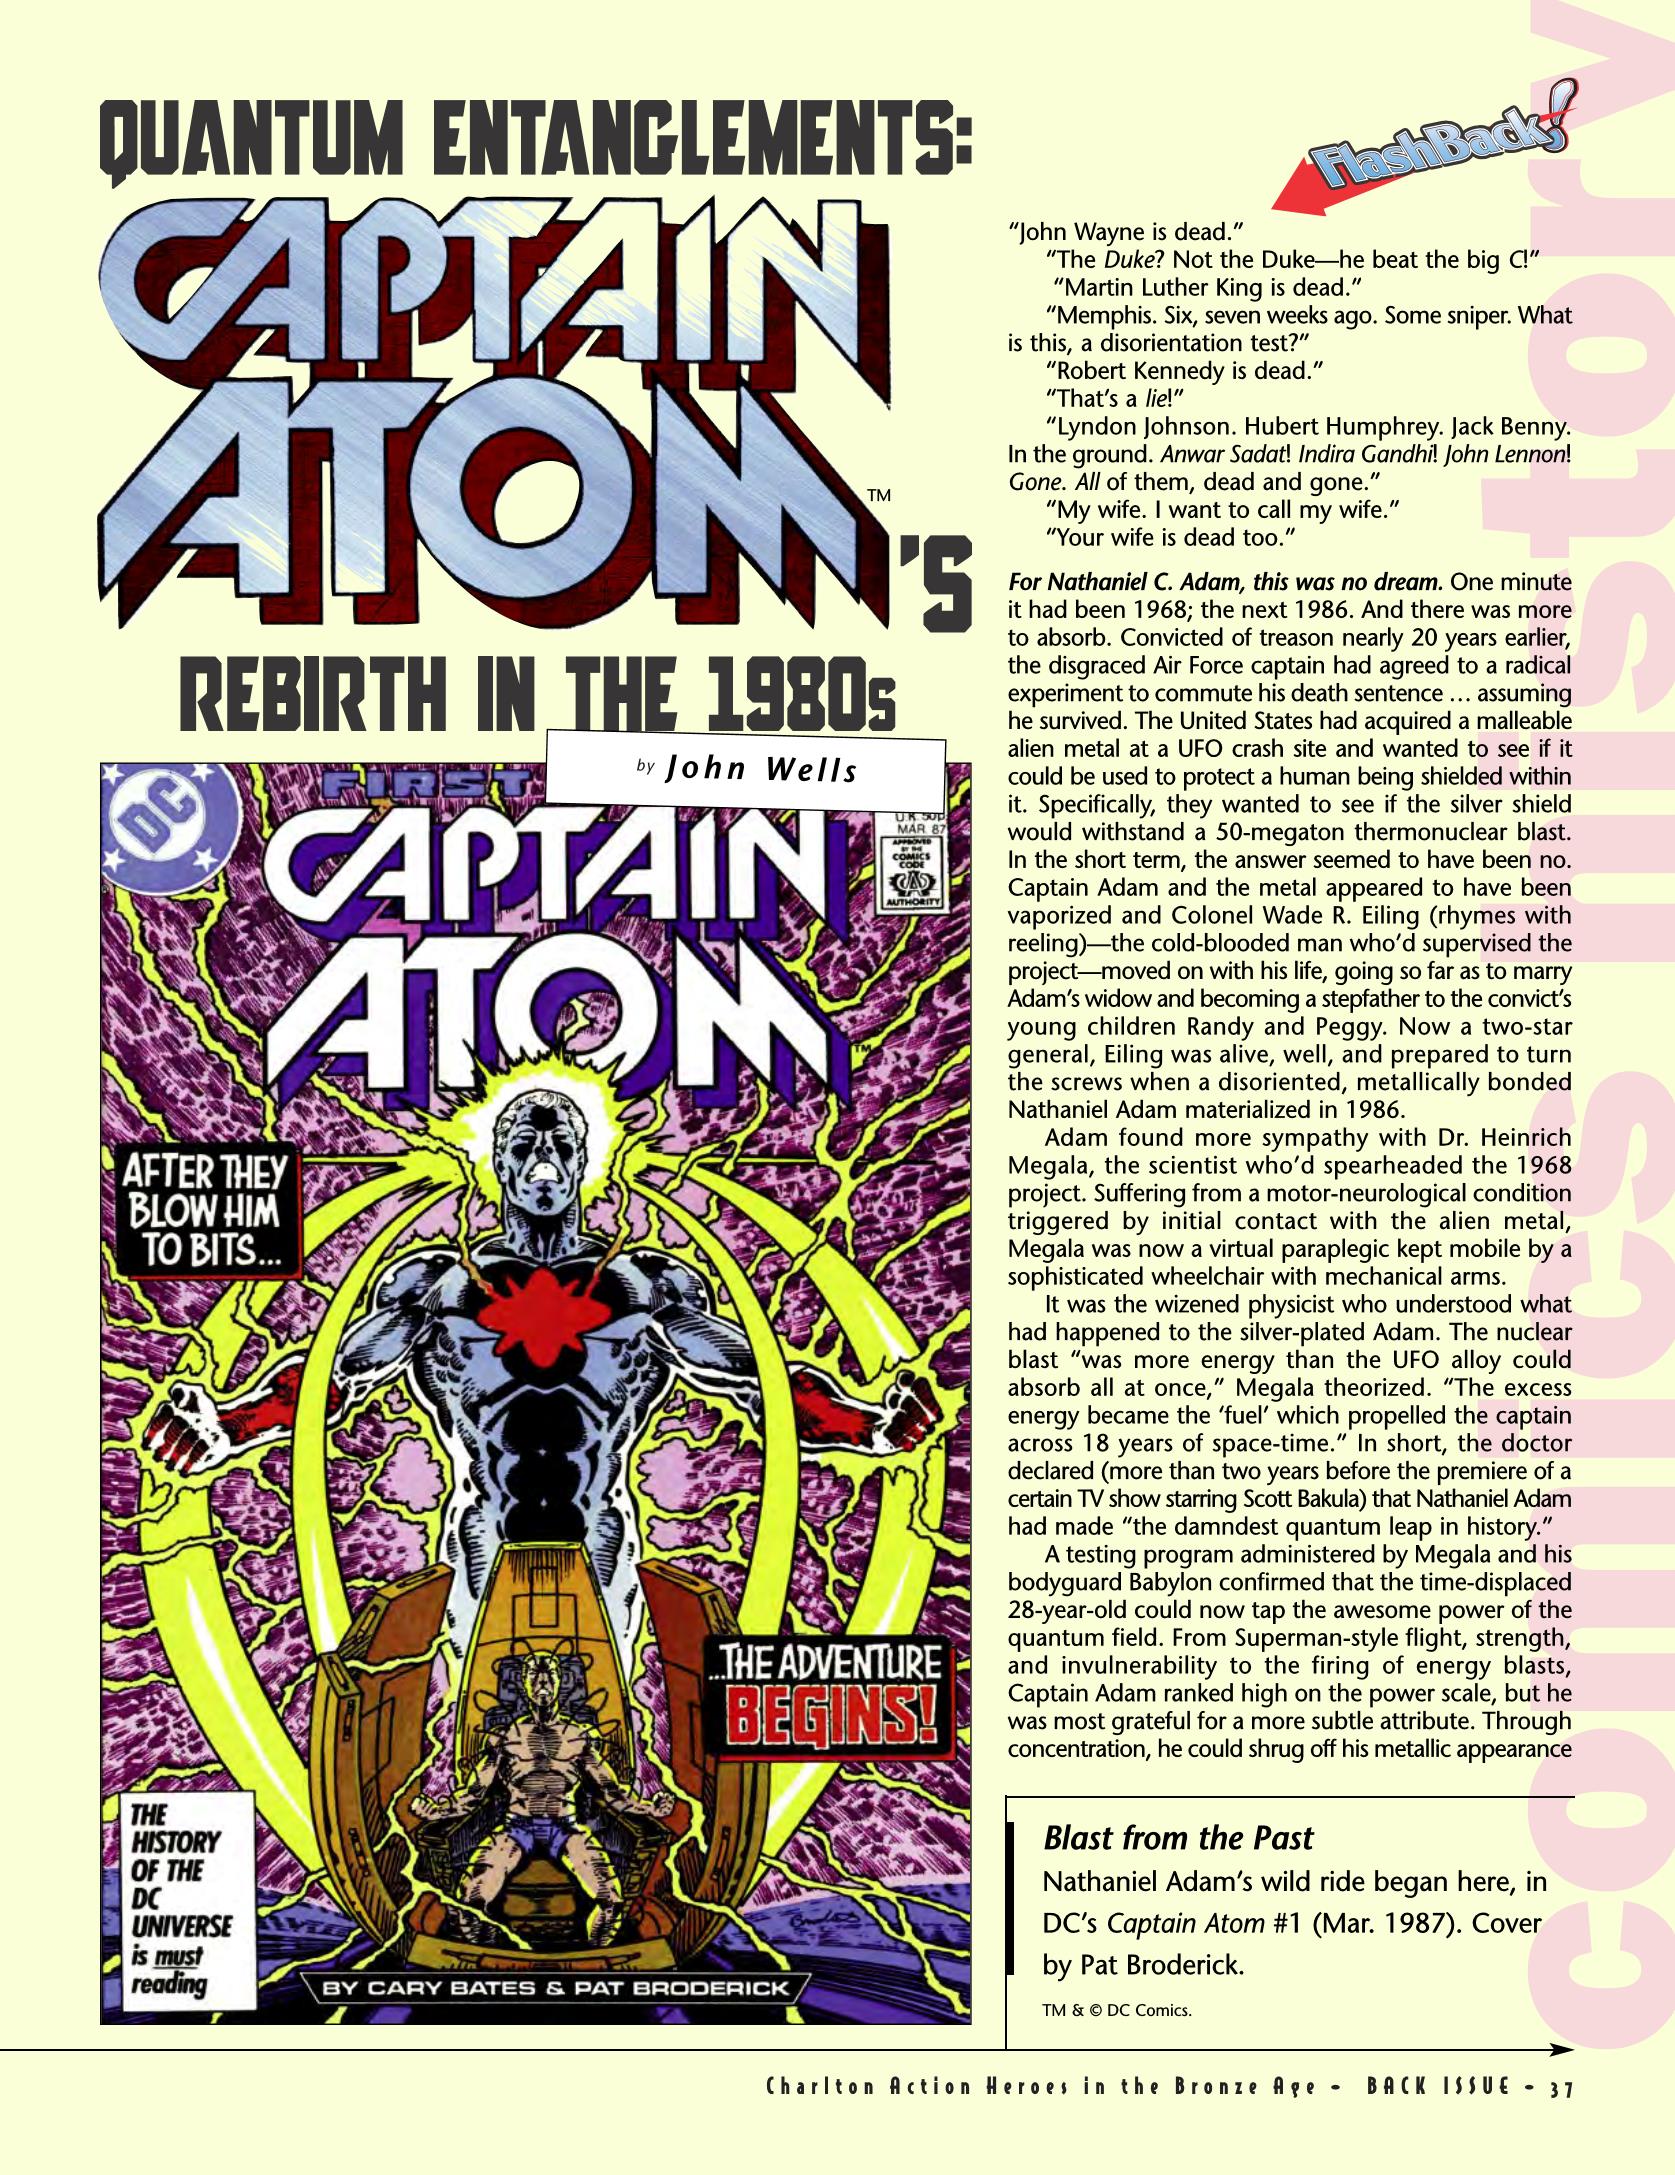 Read online Back Issue comic -  Issue #79 - 39